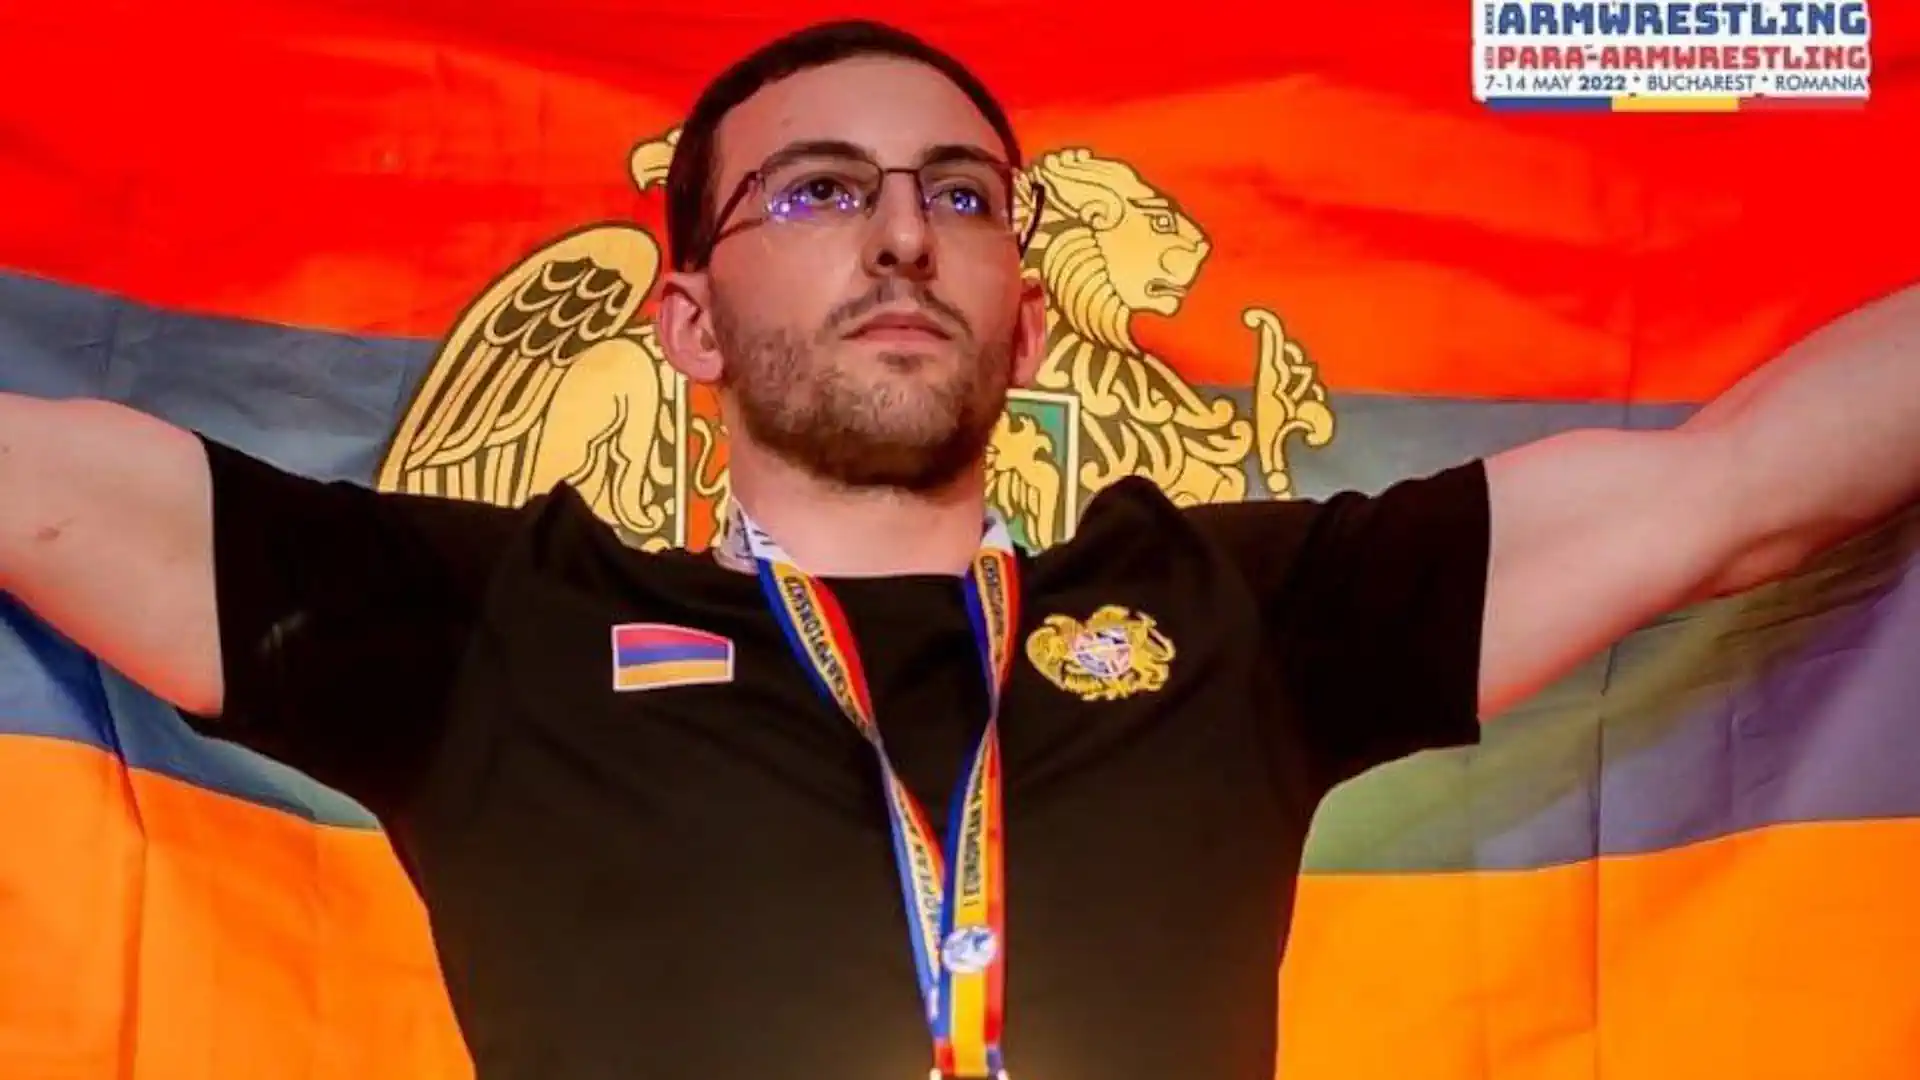 With our efforts Vachagan Hovhannisyan went to the European Armwrestling Championship